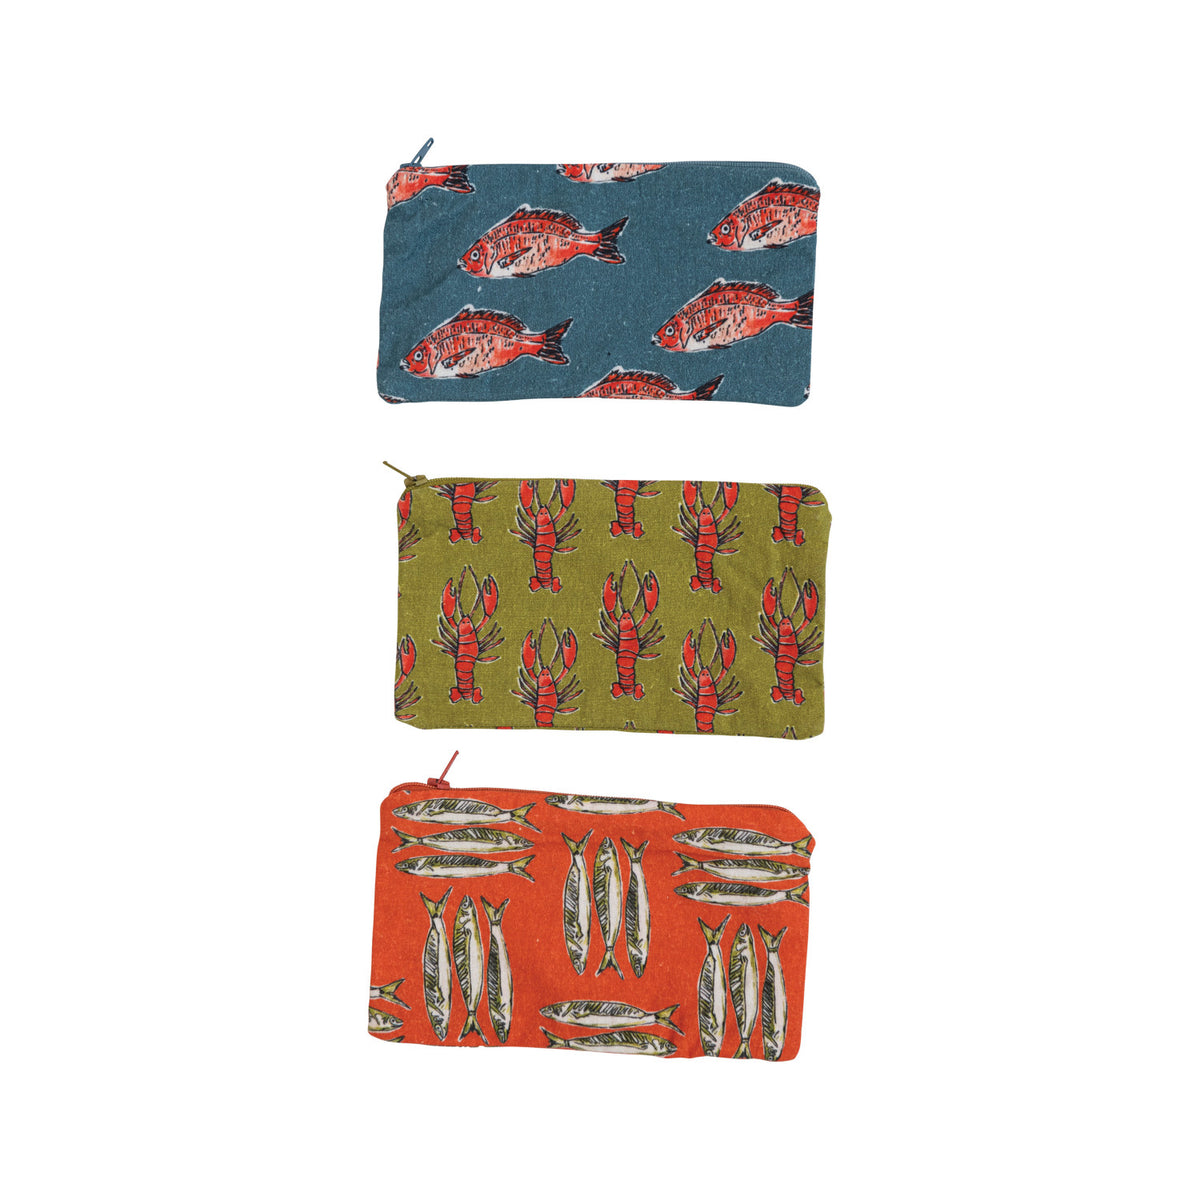 Printed Zip Pouch with Sea Life &amp; Interior Coating, Multi Color, 3 Styles